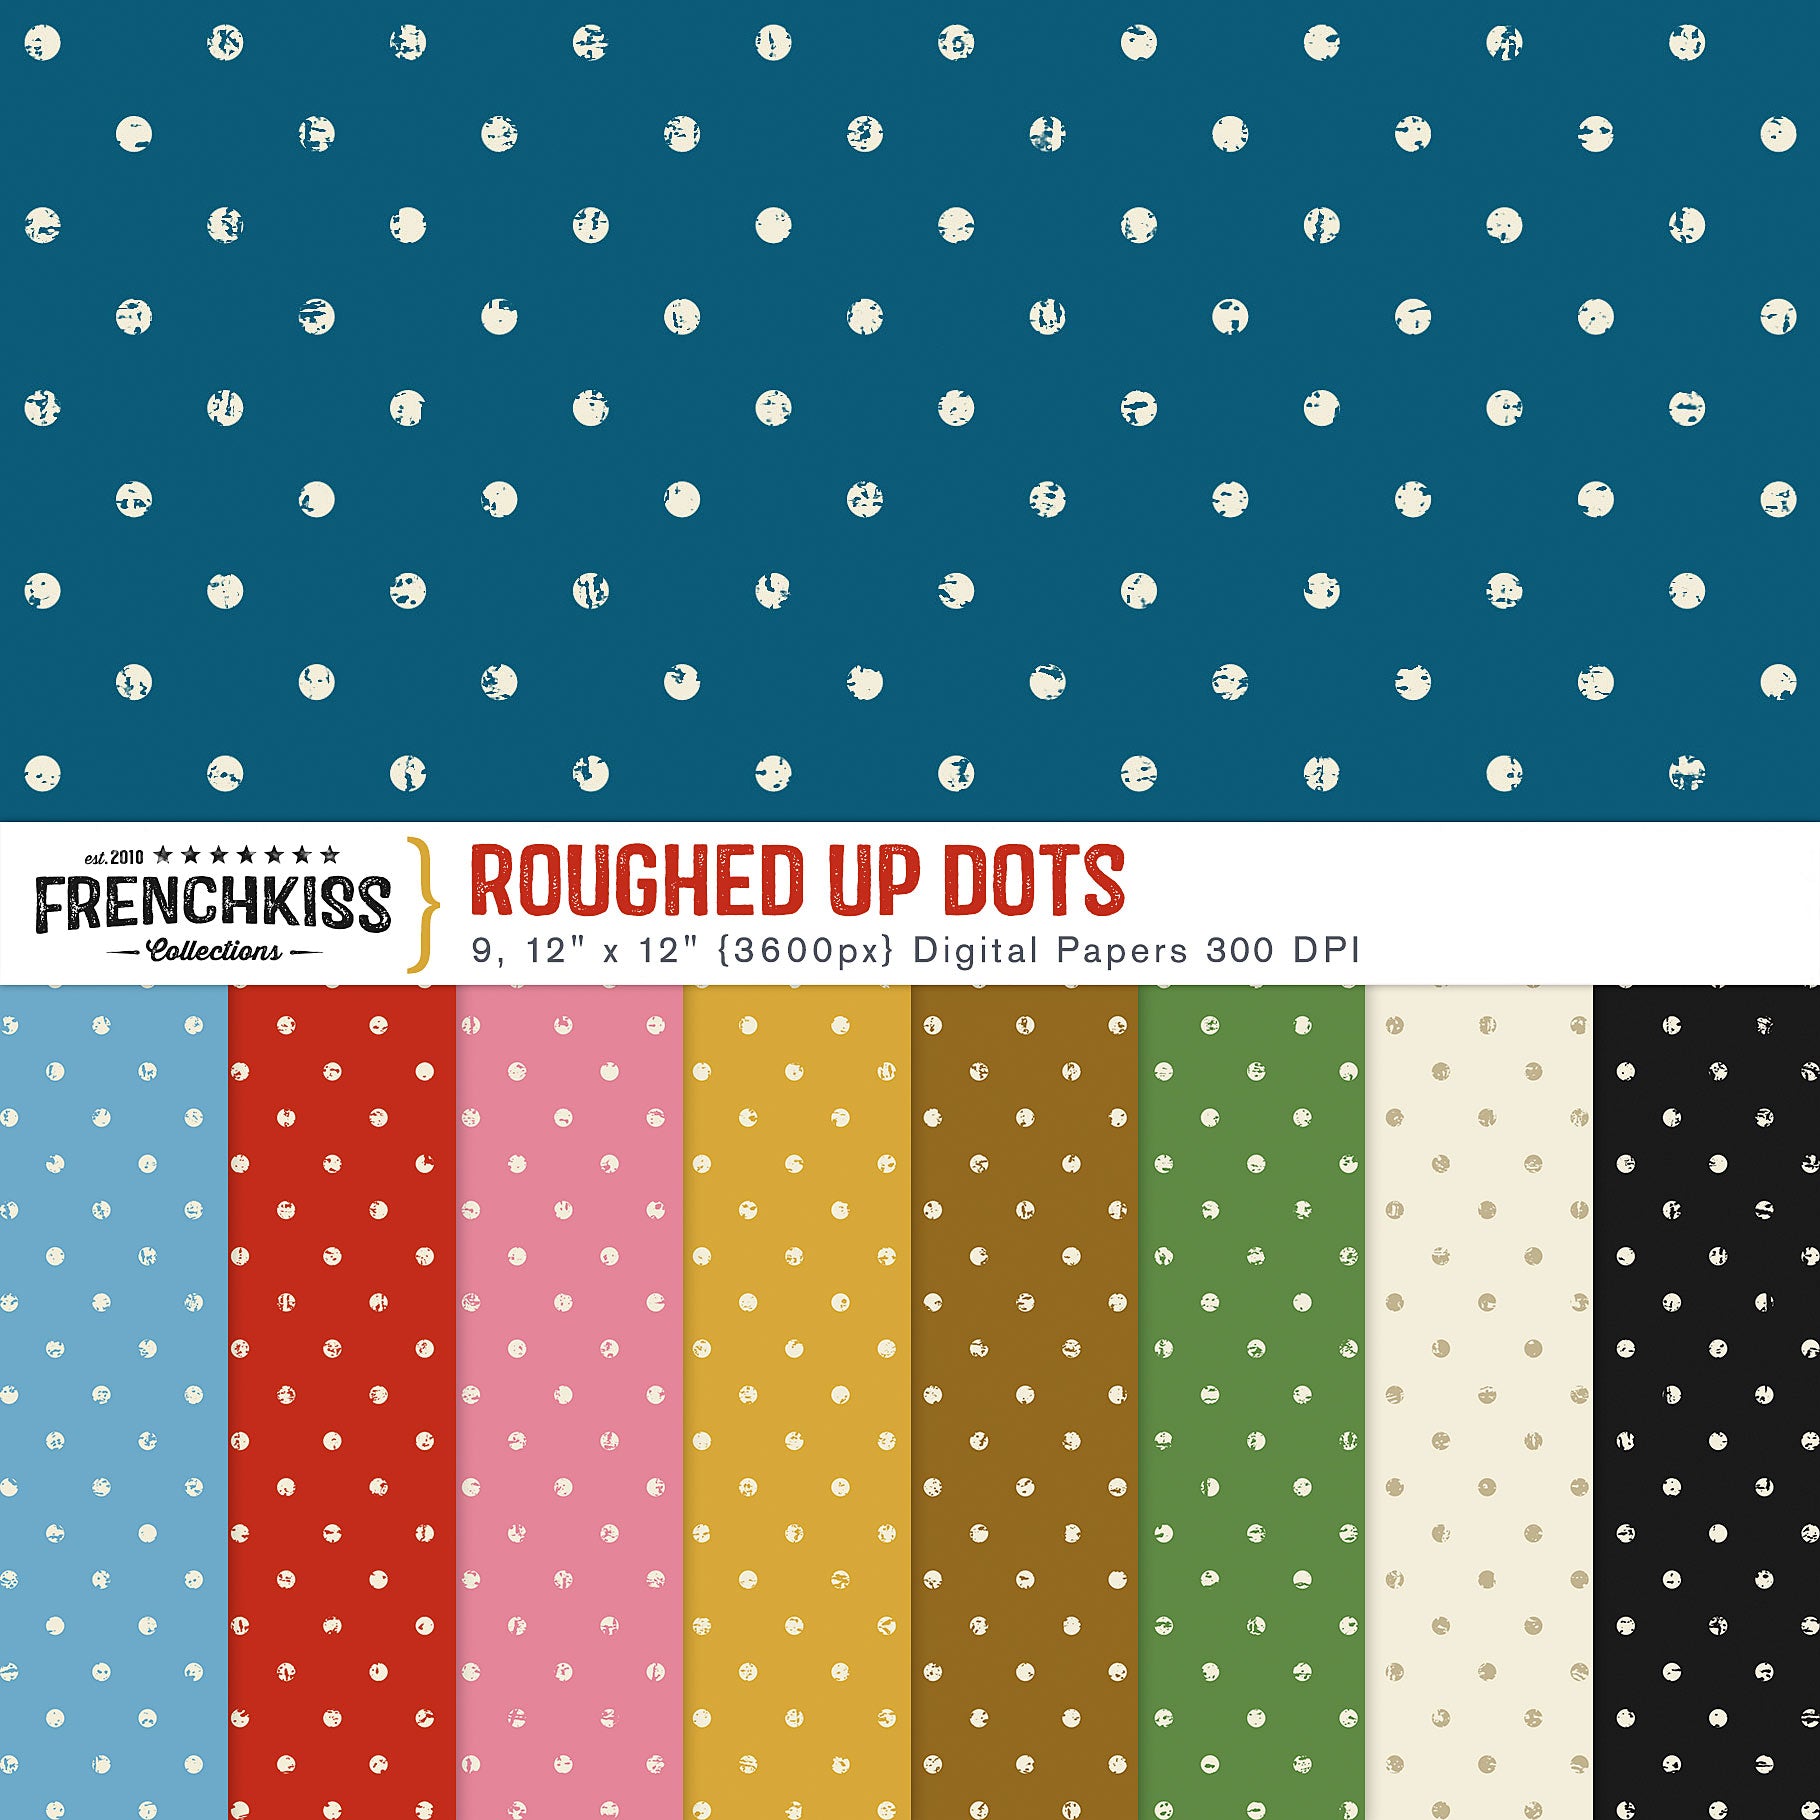 Roughed Up Dots Digital Papers. A classic polka dot pattern with a twist.